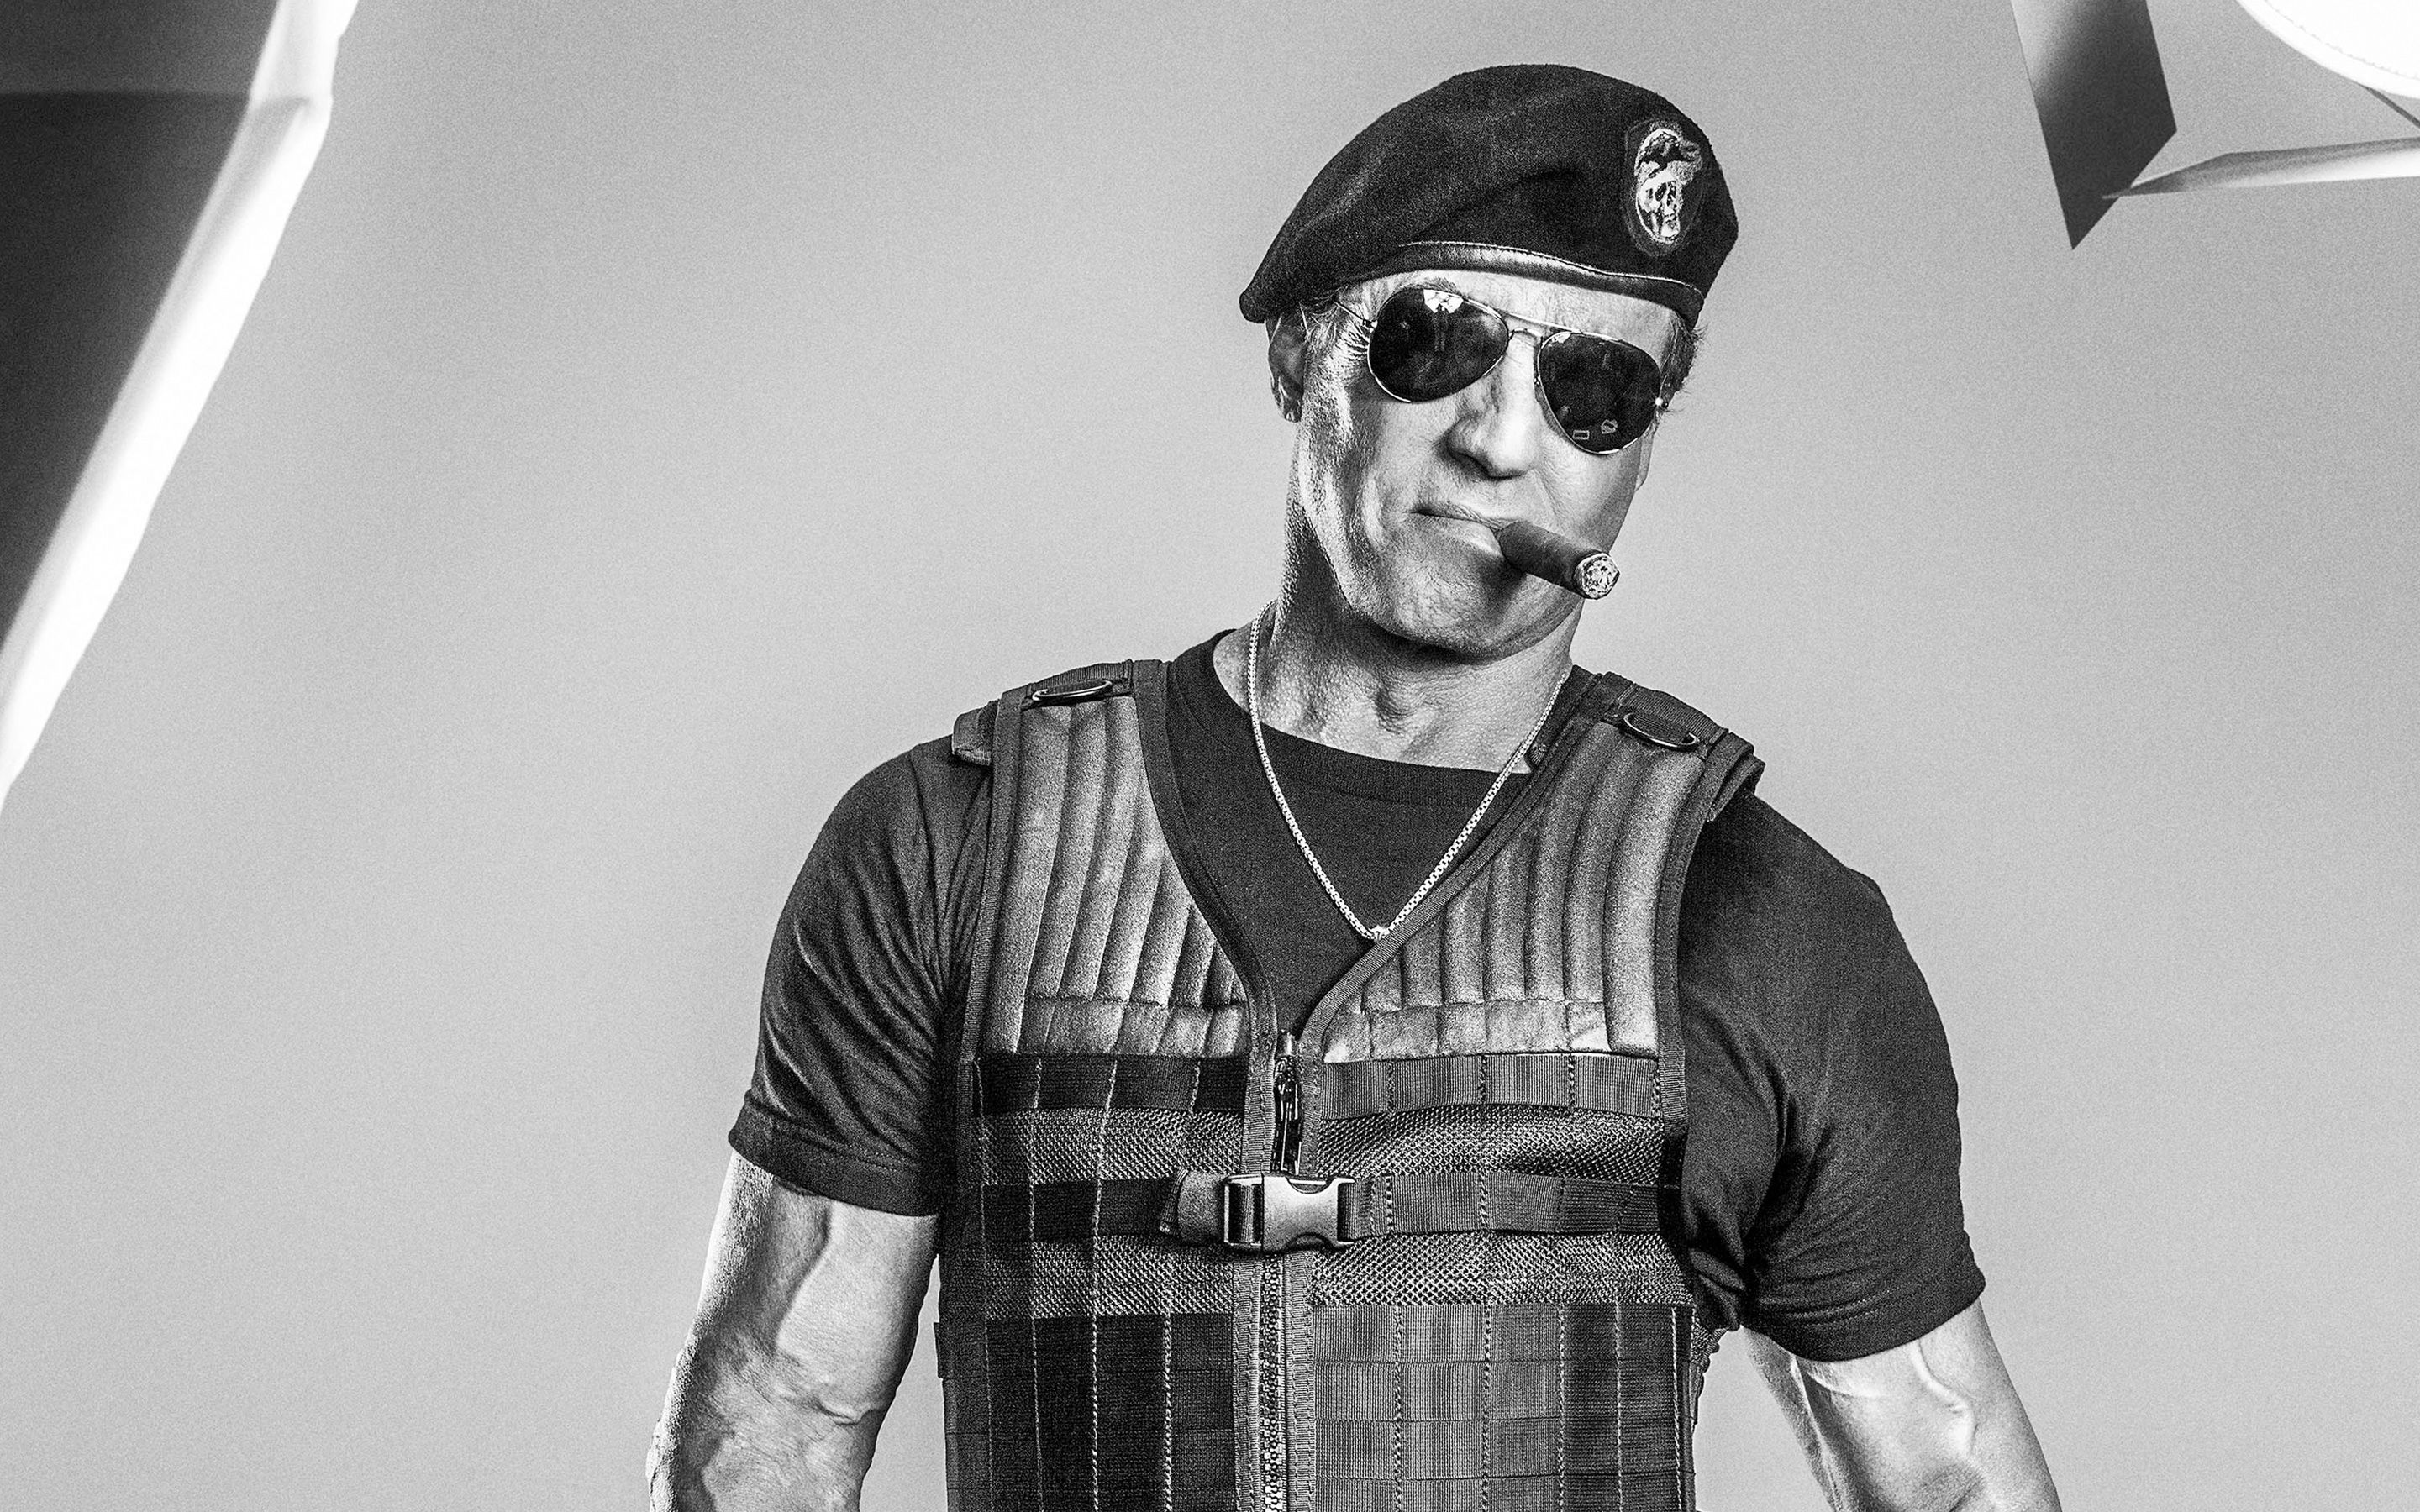 Sylvester Stallone in The Expendables 3 Wallpaper. HD Wallpaper